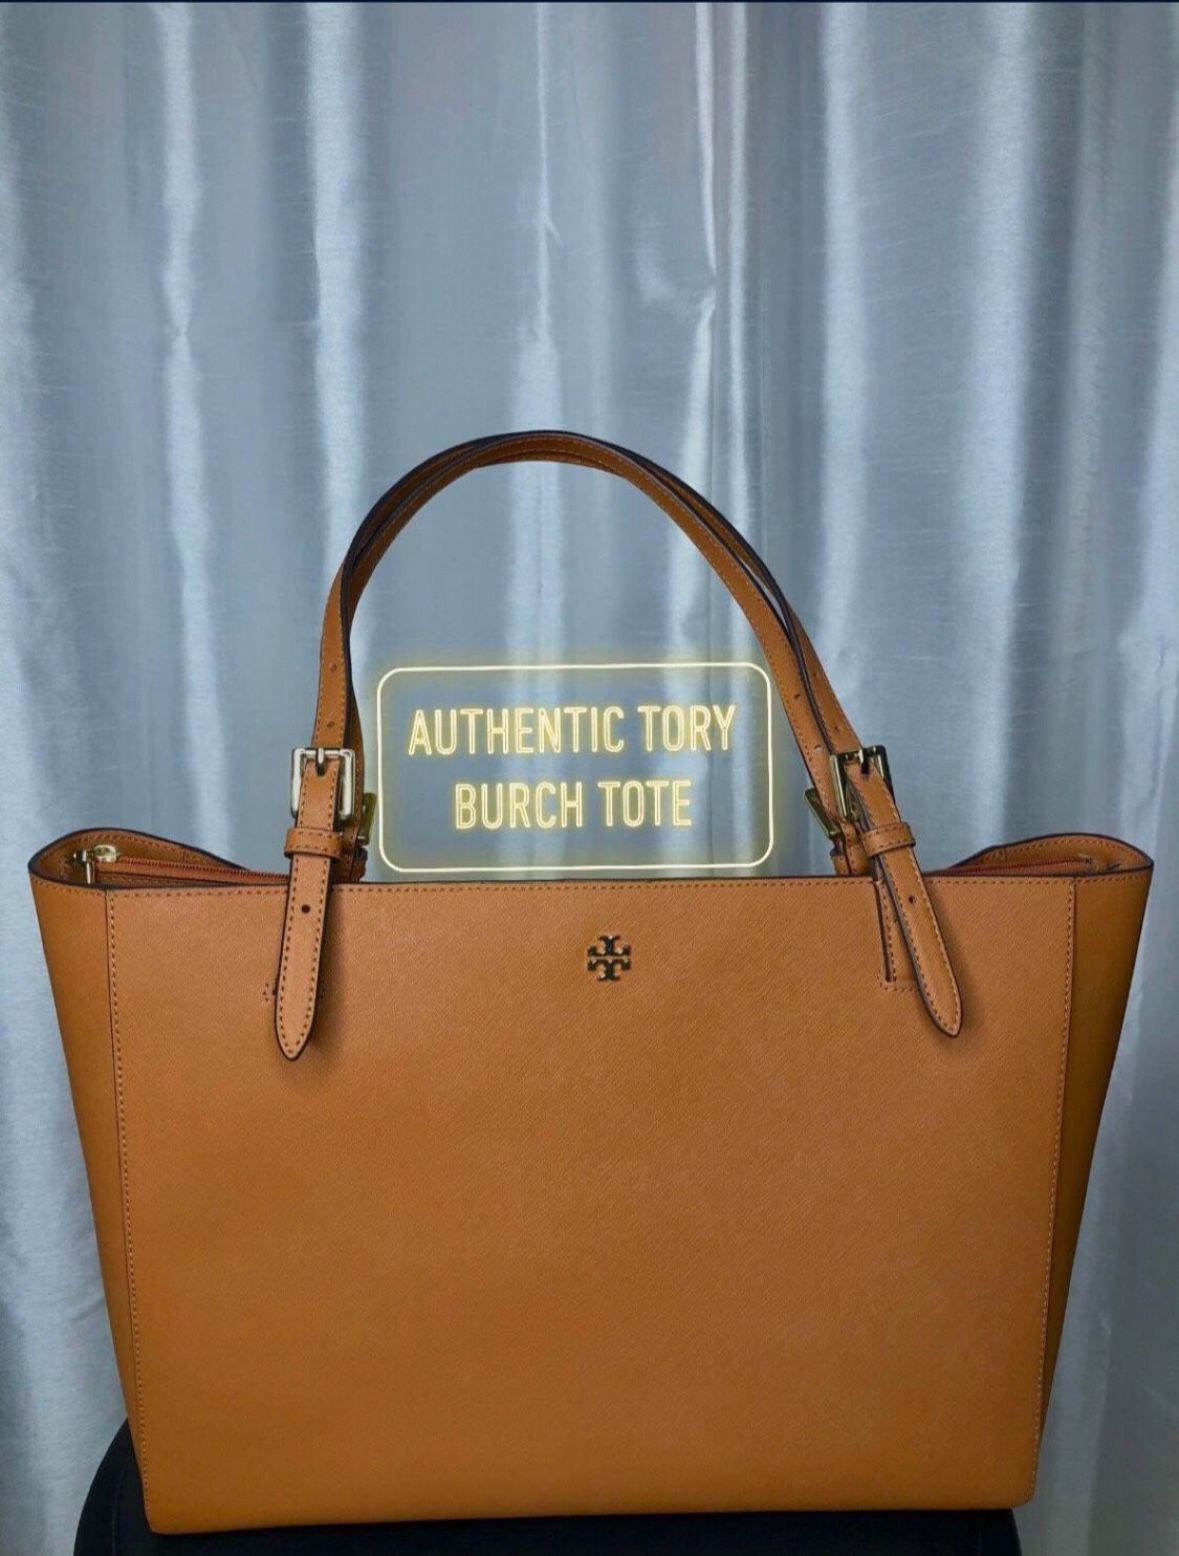 LARGE AUTHENTIC TORY BURCH LEATHER TOTE SHOULDER BAG SAFFIANO PURSE CROSSBODY